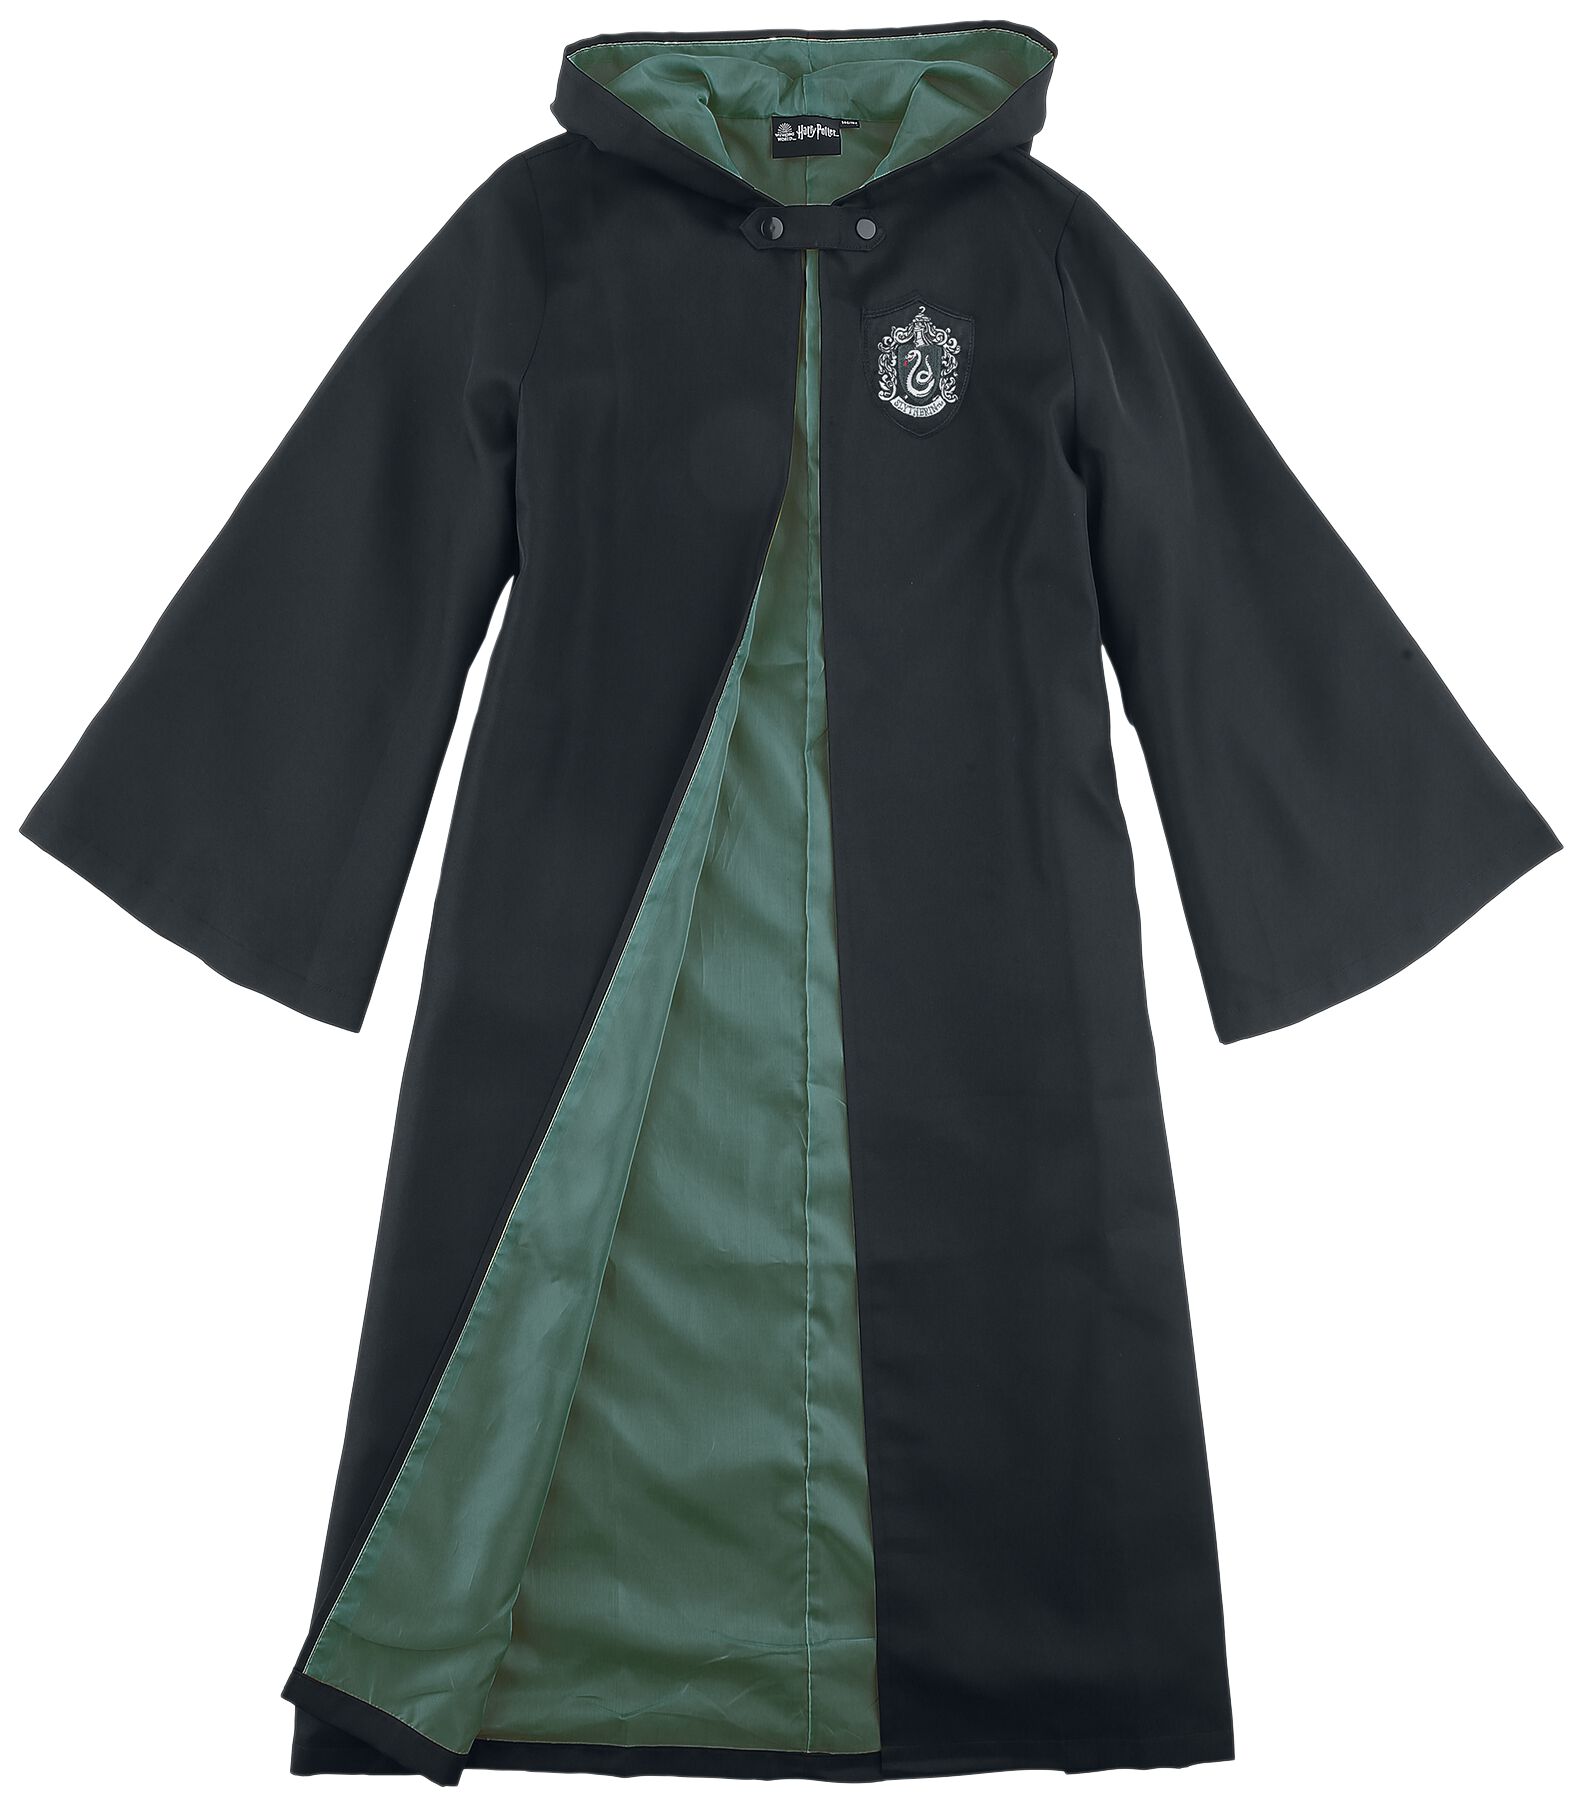 Slytherin Robe Adult  Harry Potter Clothing from House of Spells